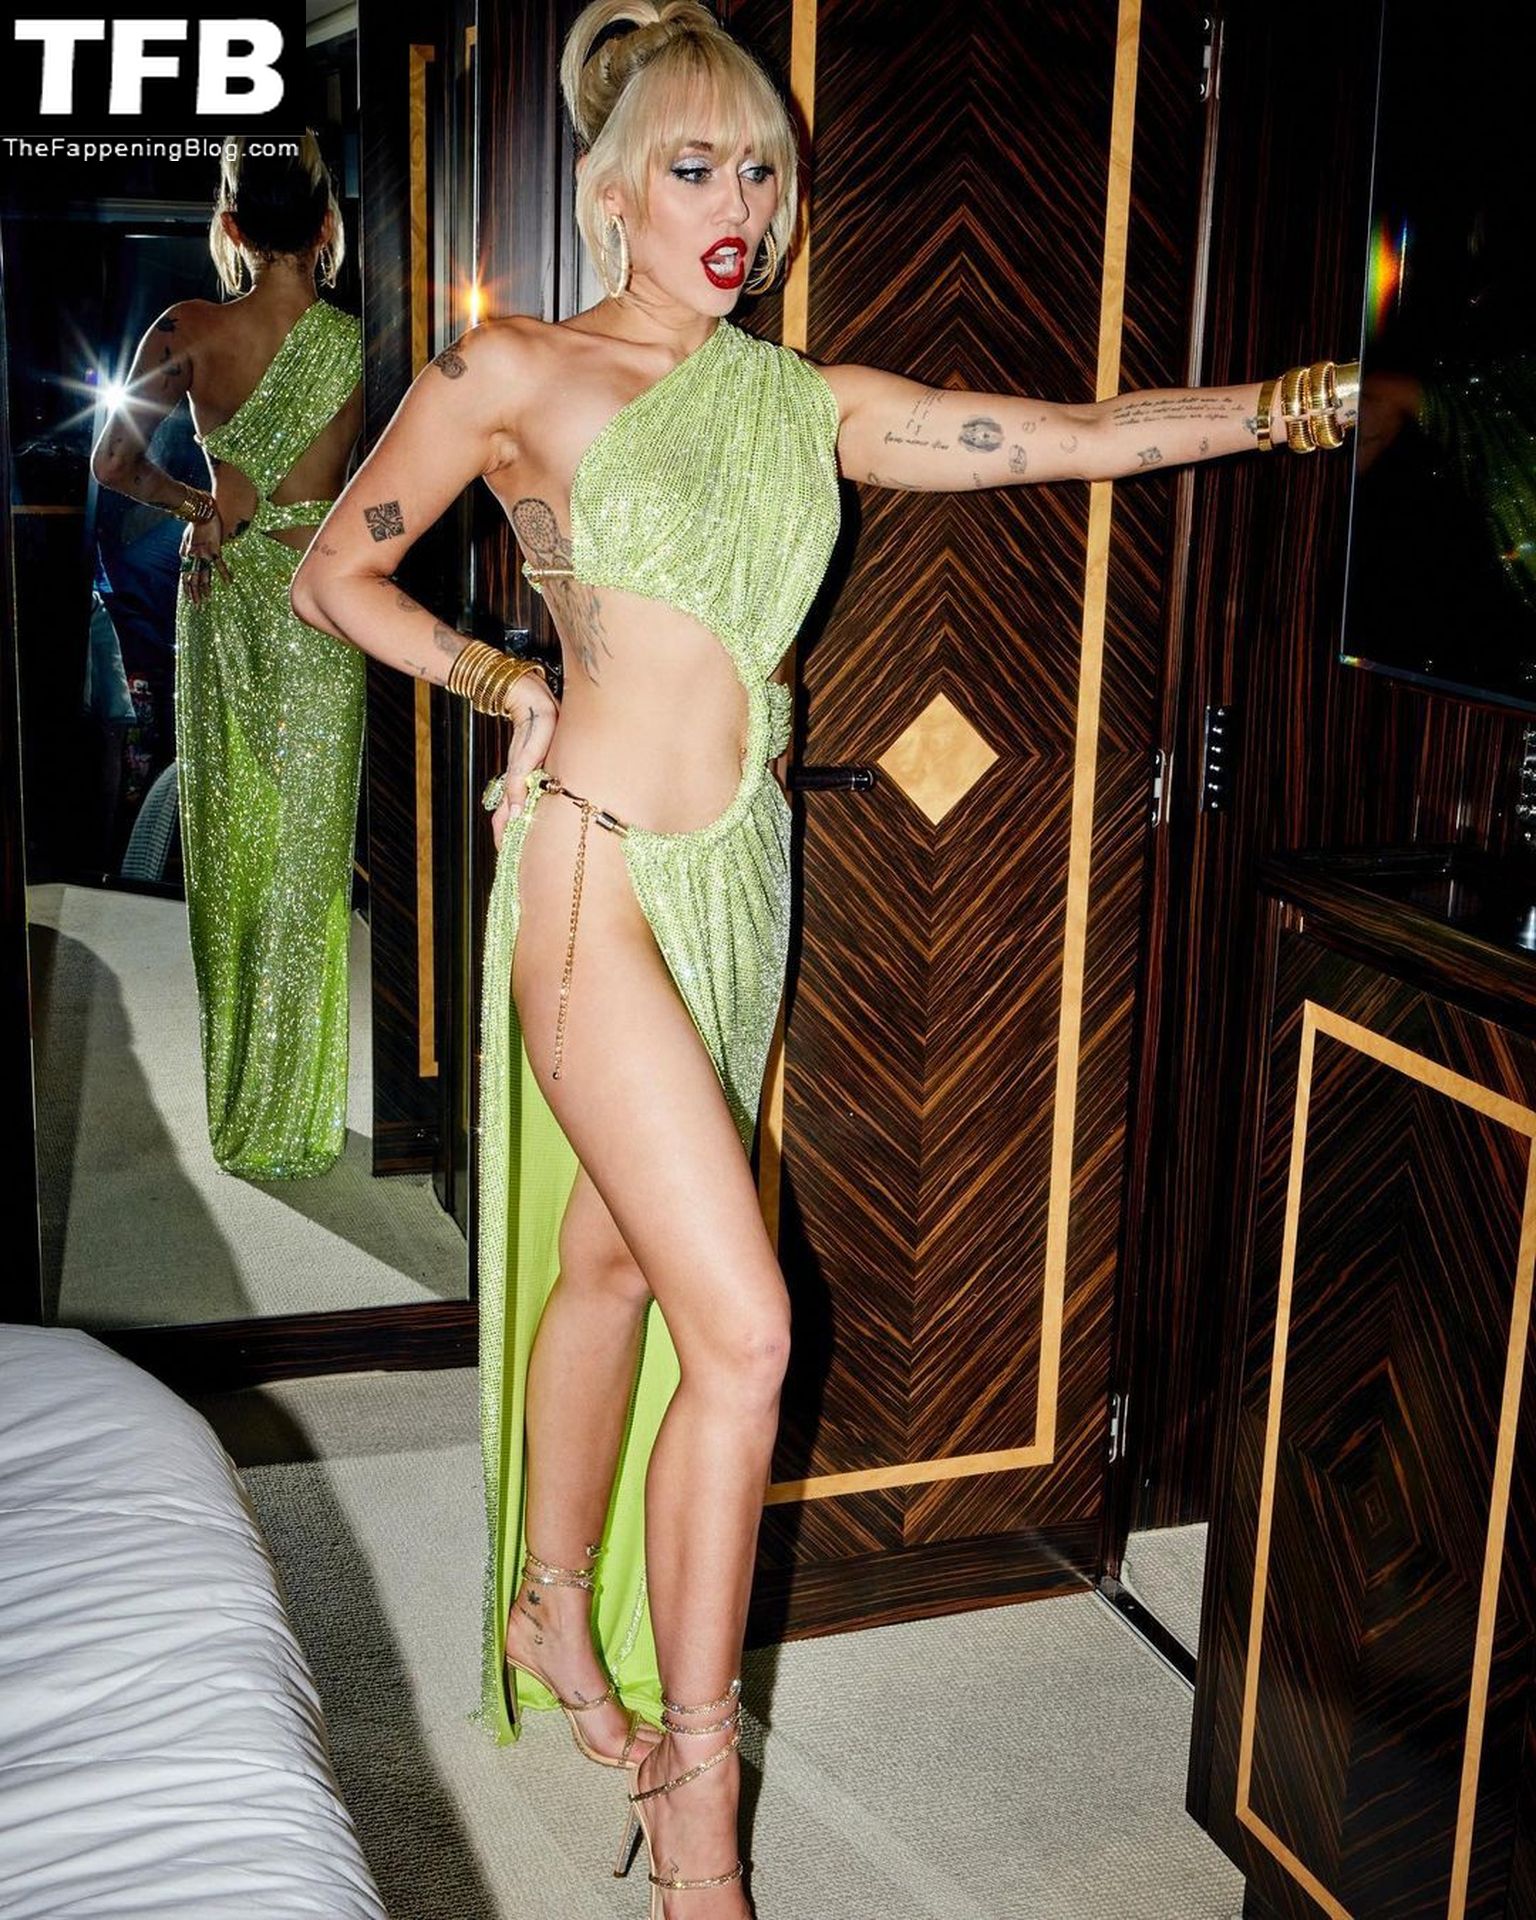 Miley-Cyrus-Pantyless-in-Sexy-Dress-6-thefappeningblog.com_.jpg